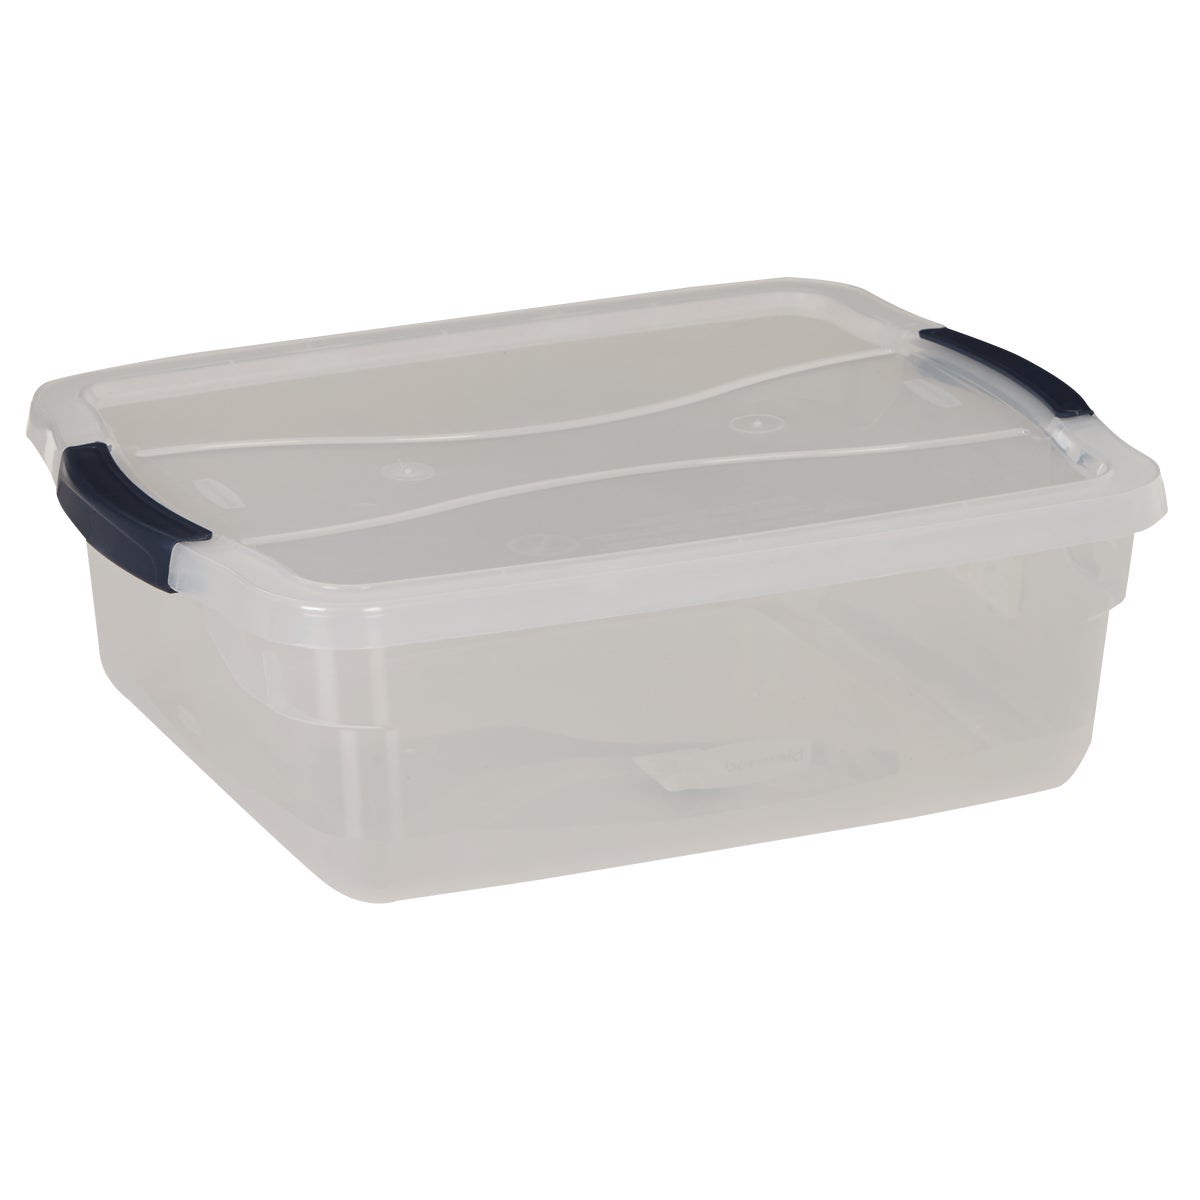 Item 611808, The Rubbermaid Cleverstore Tote is expertly designed with recessed lids and